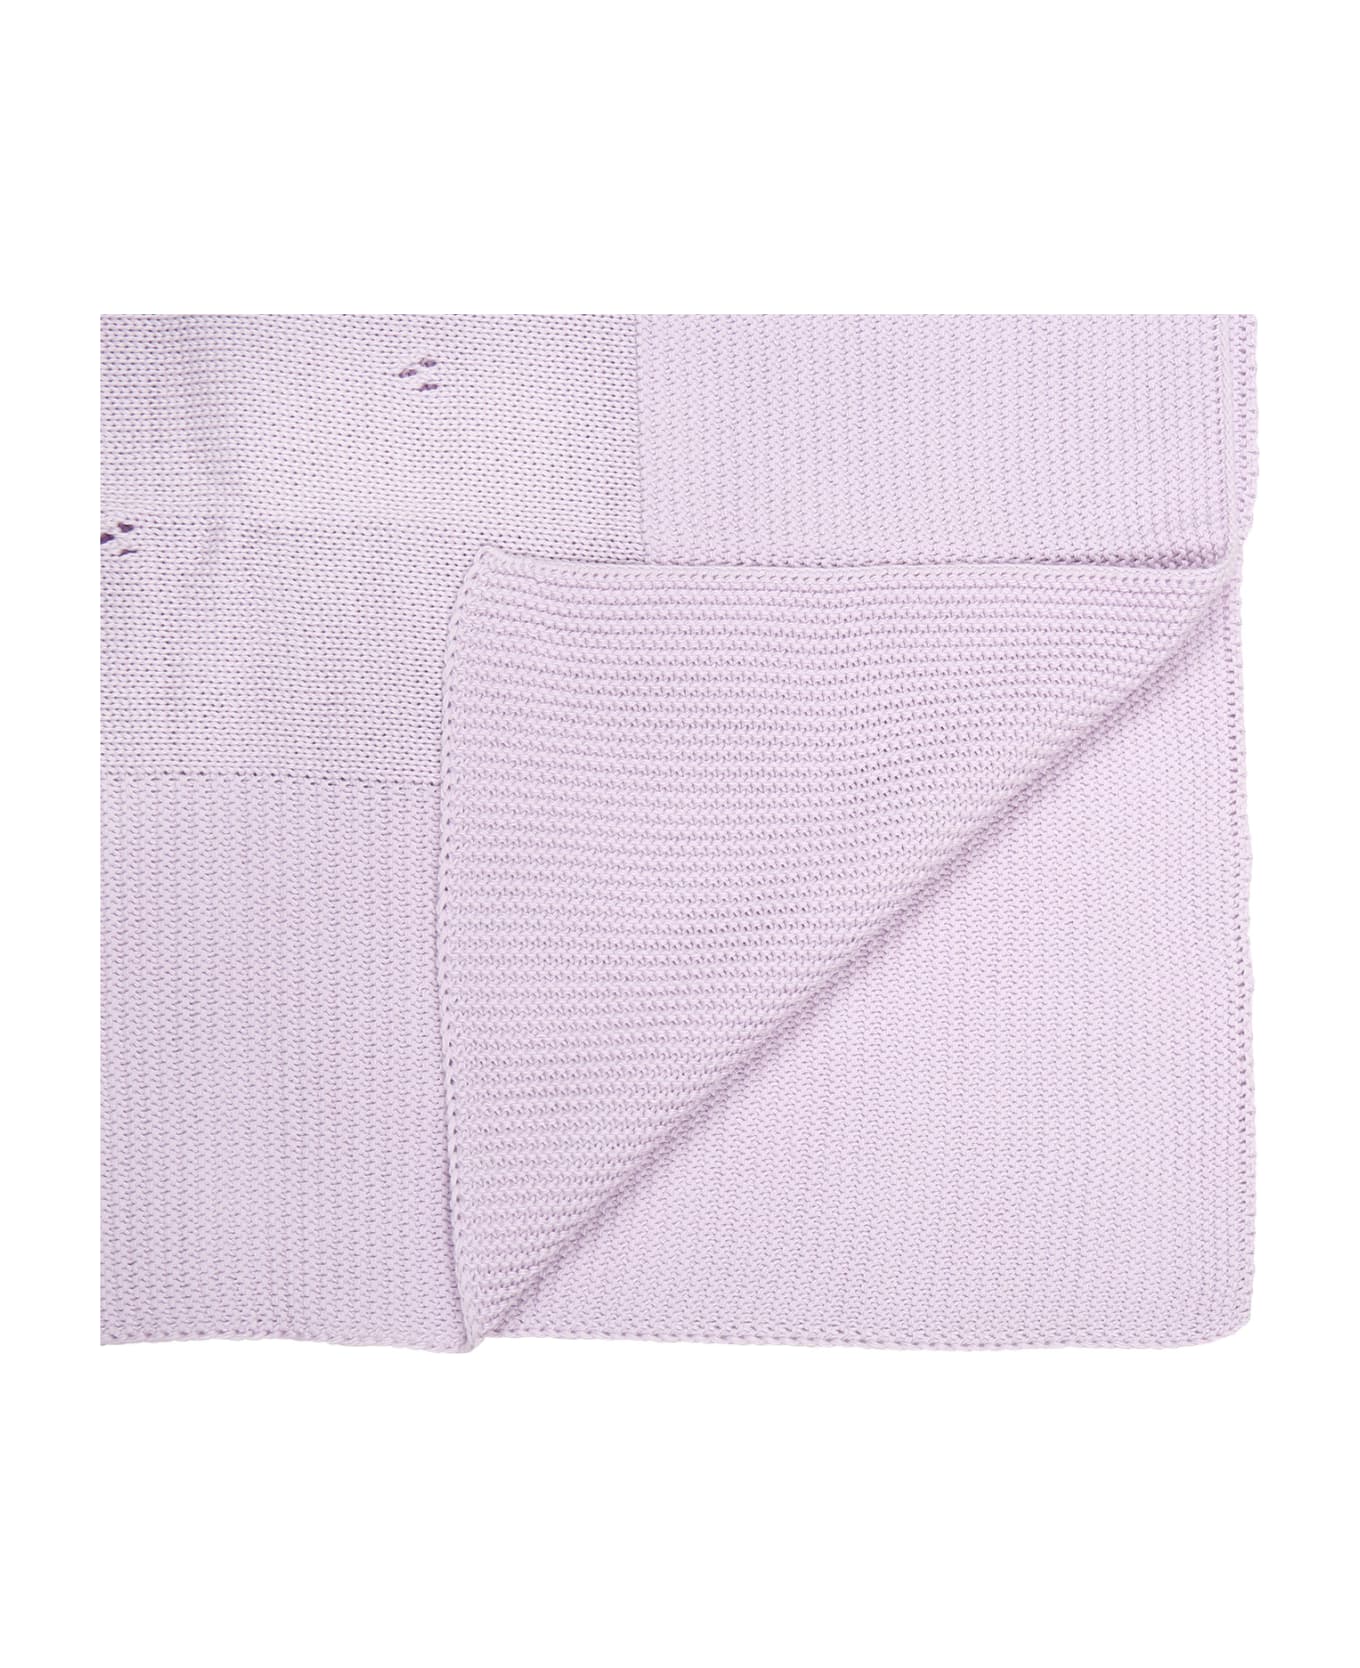 Little Bear Wisteria Baby Blanket For Baby Girl - Violet アクセサリー＆ギフト